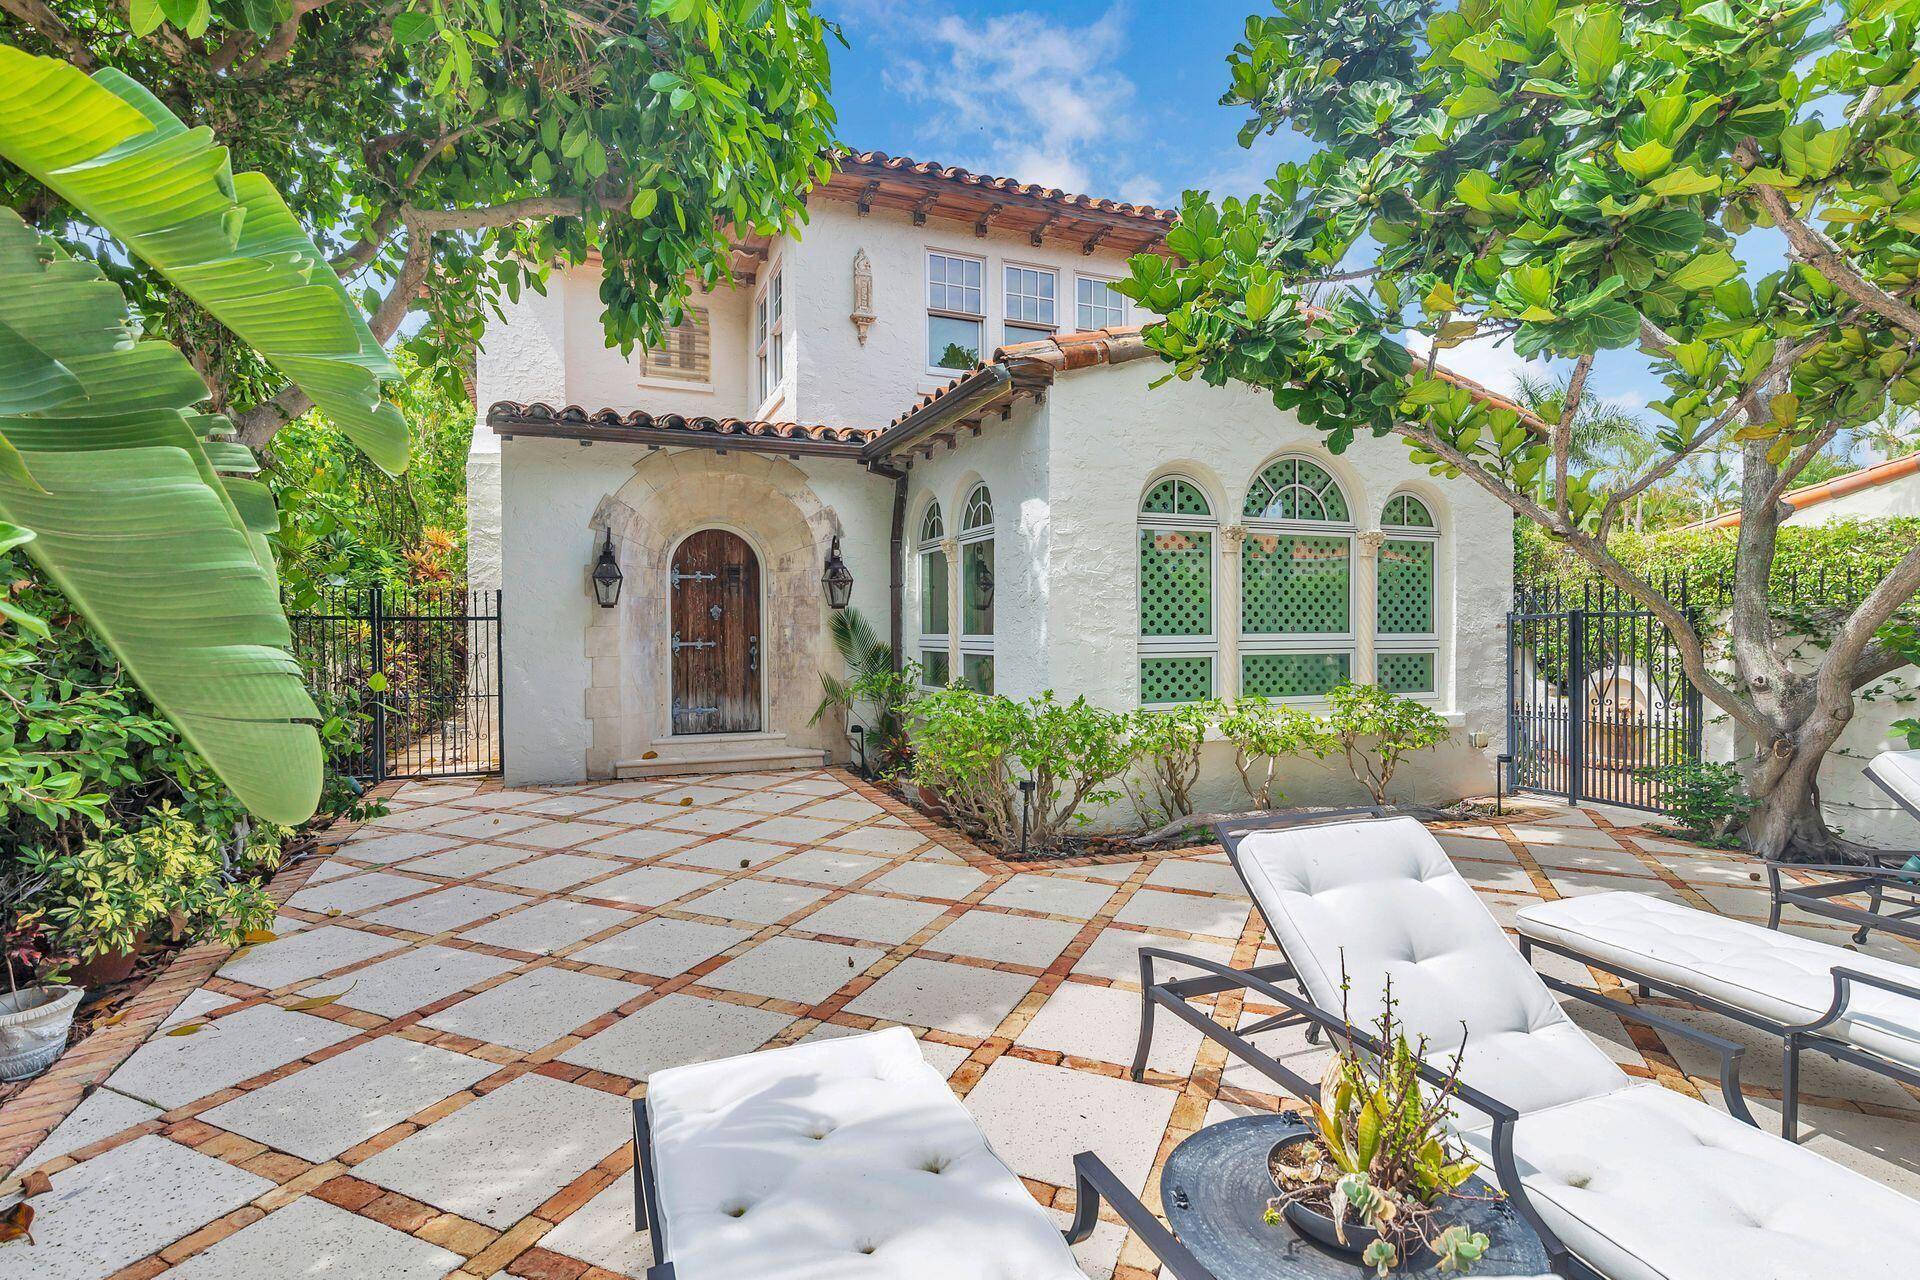 Authentic El Cid Spanish Courtyard Home with stunning architectural details throughout.